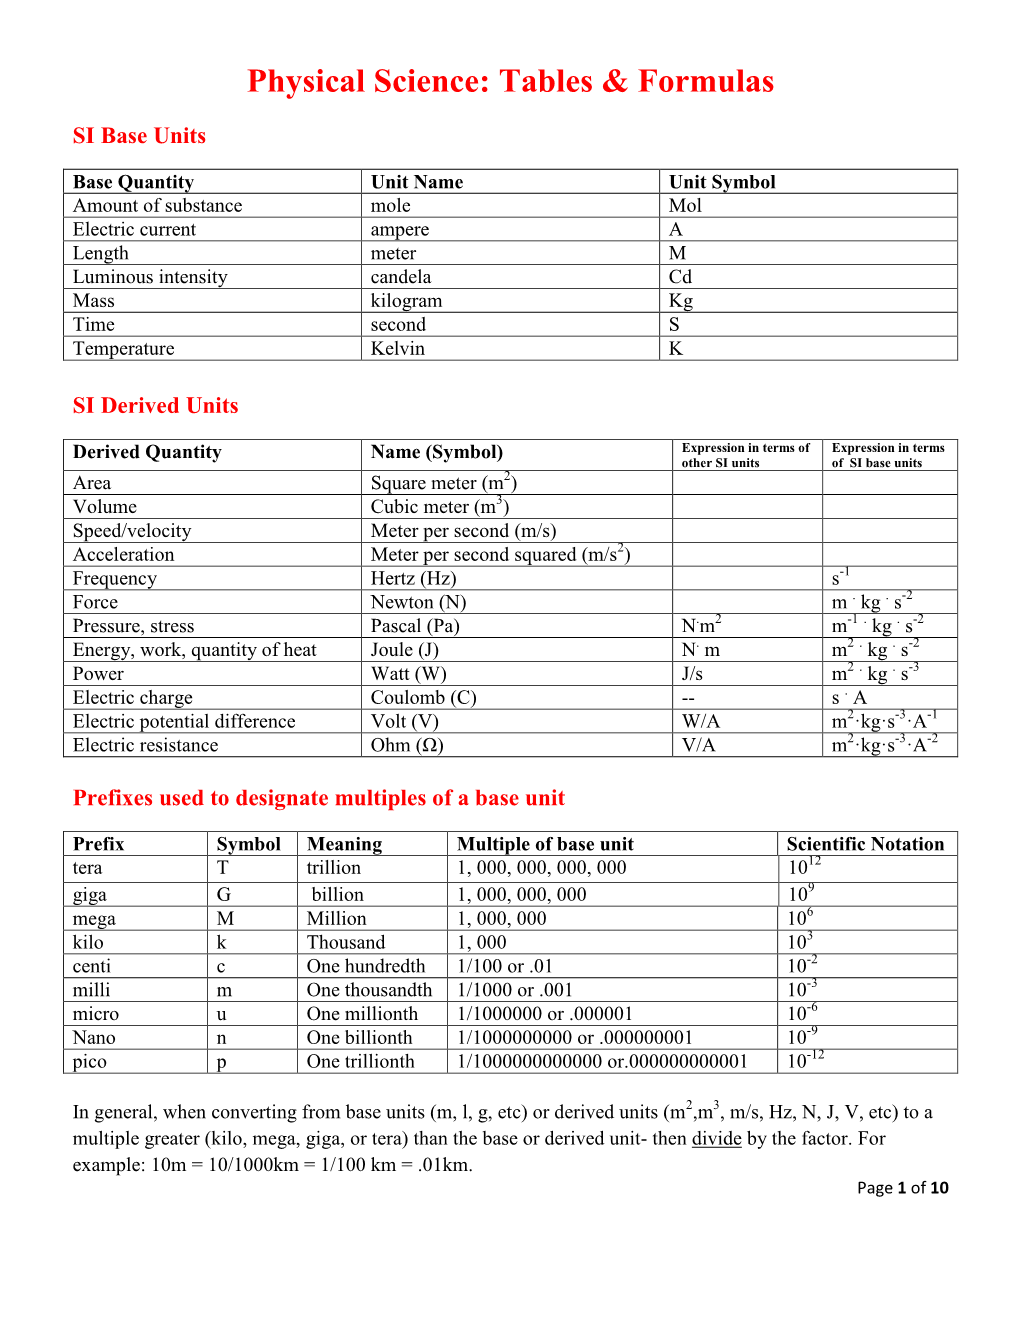 Physical Science Tables Formulas and Equations